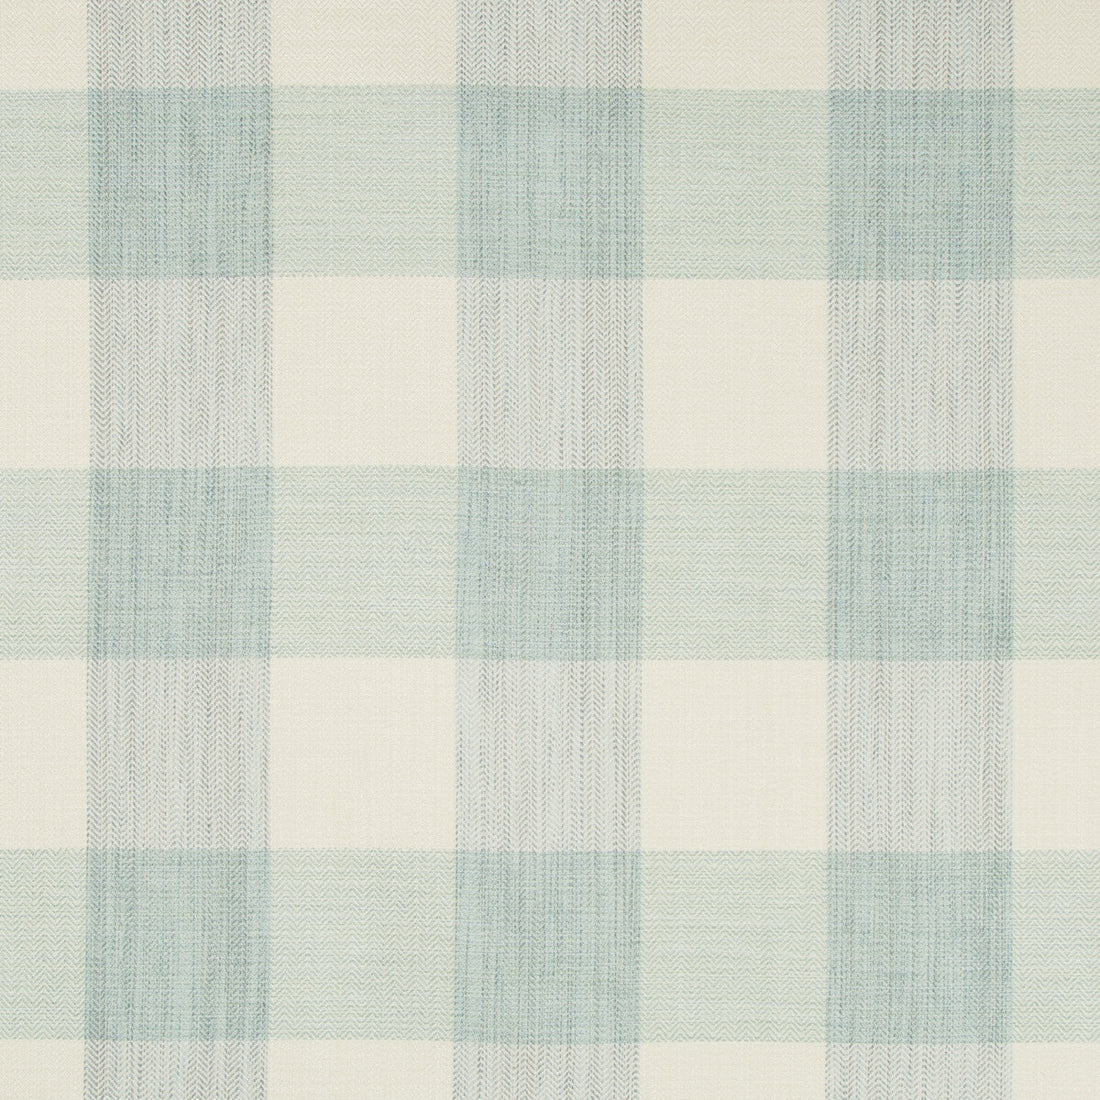 Barnsdale fabric in cloud color - pattern 35306.511.0 - by Kravet Basics in the Greenwich collection